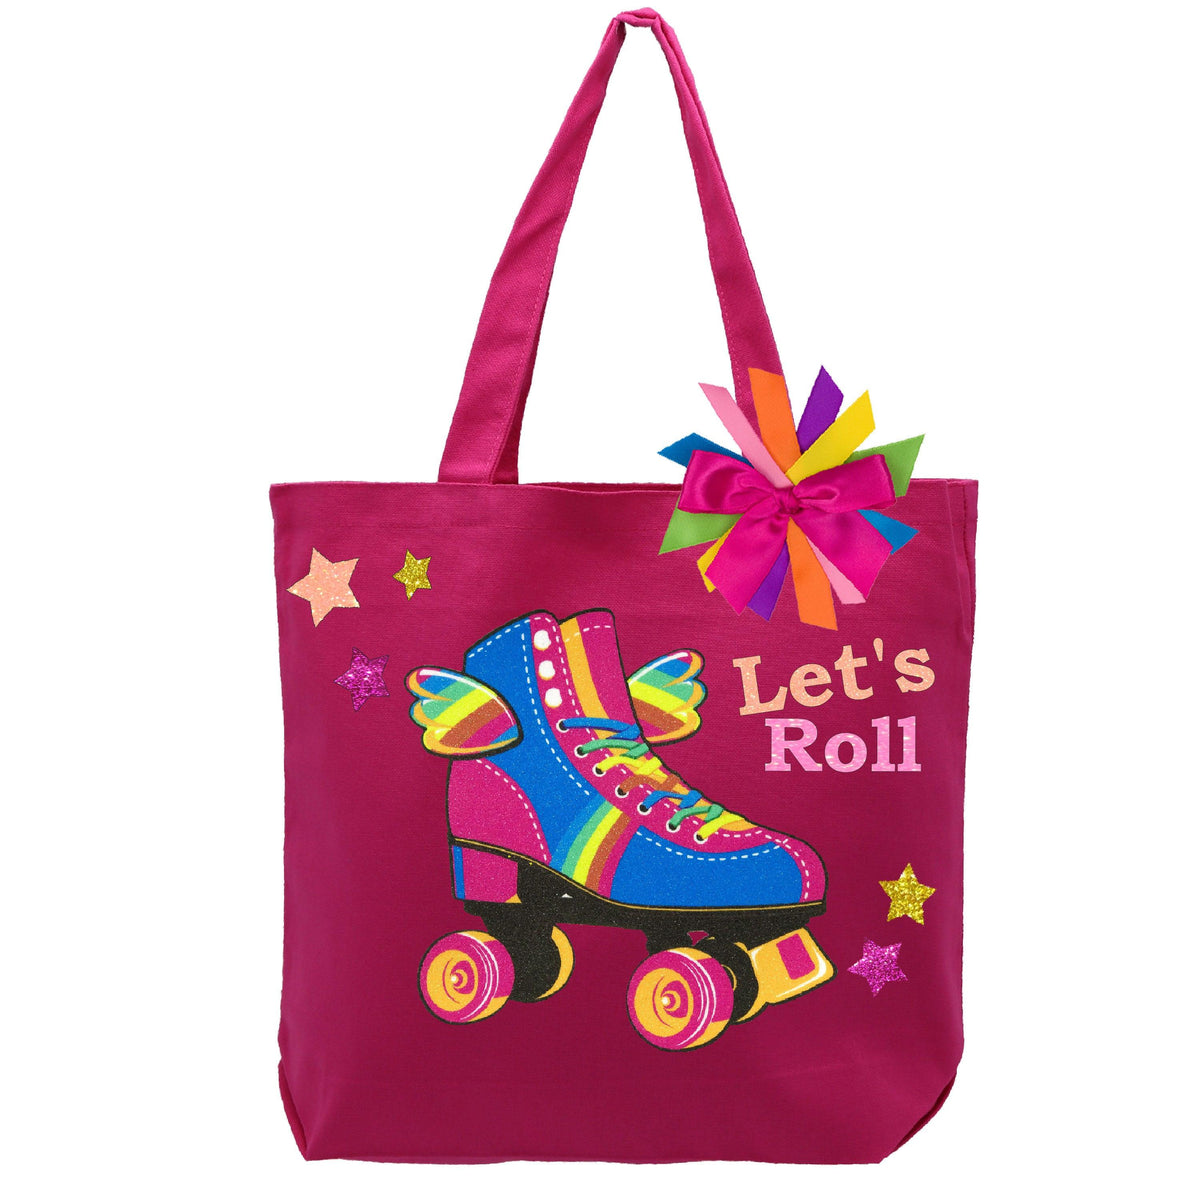 happy wings roller skate tote bag saying Let's Roll with stripes, stars, and rainbow bow